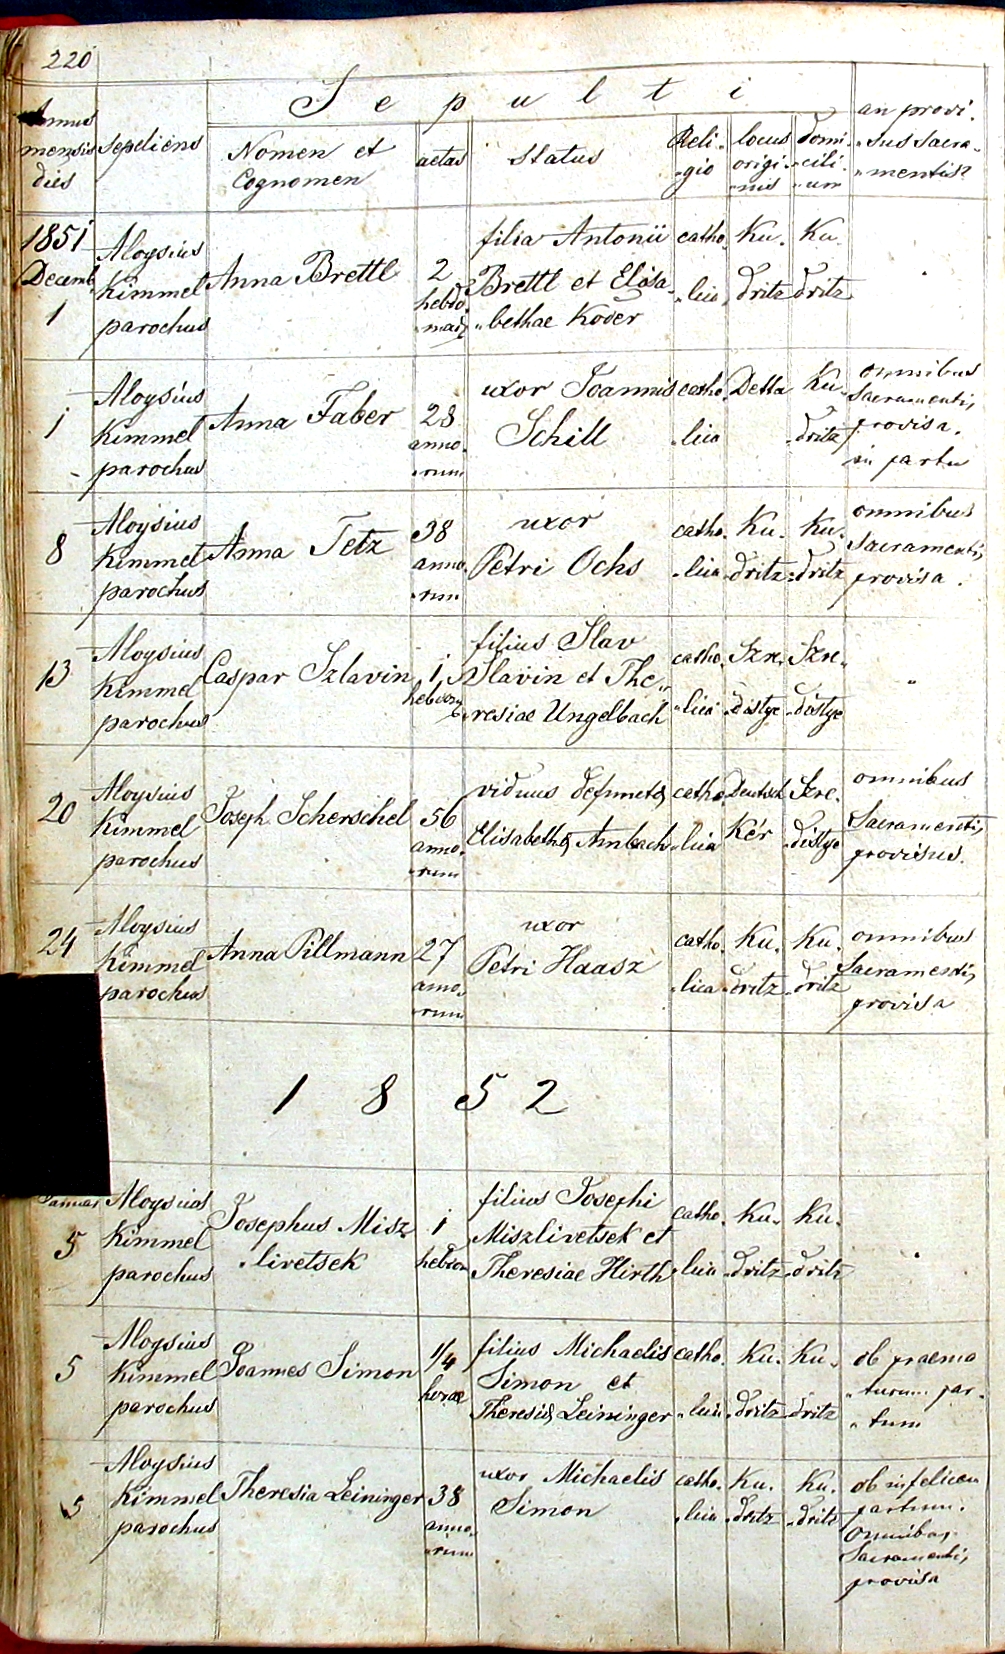 images/church_records/DEATHS/1866-1879D/1879/220